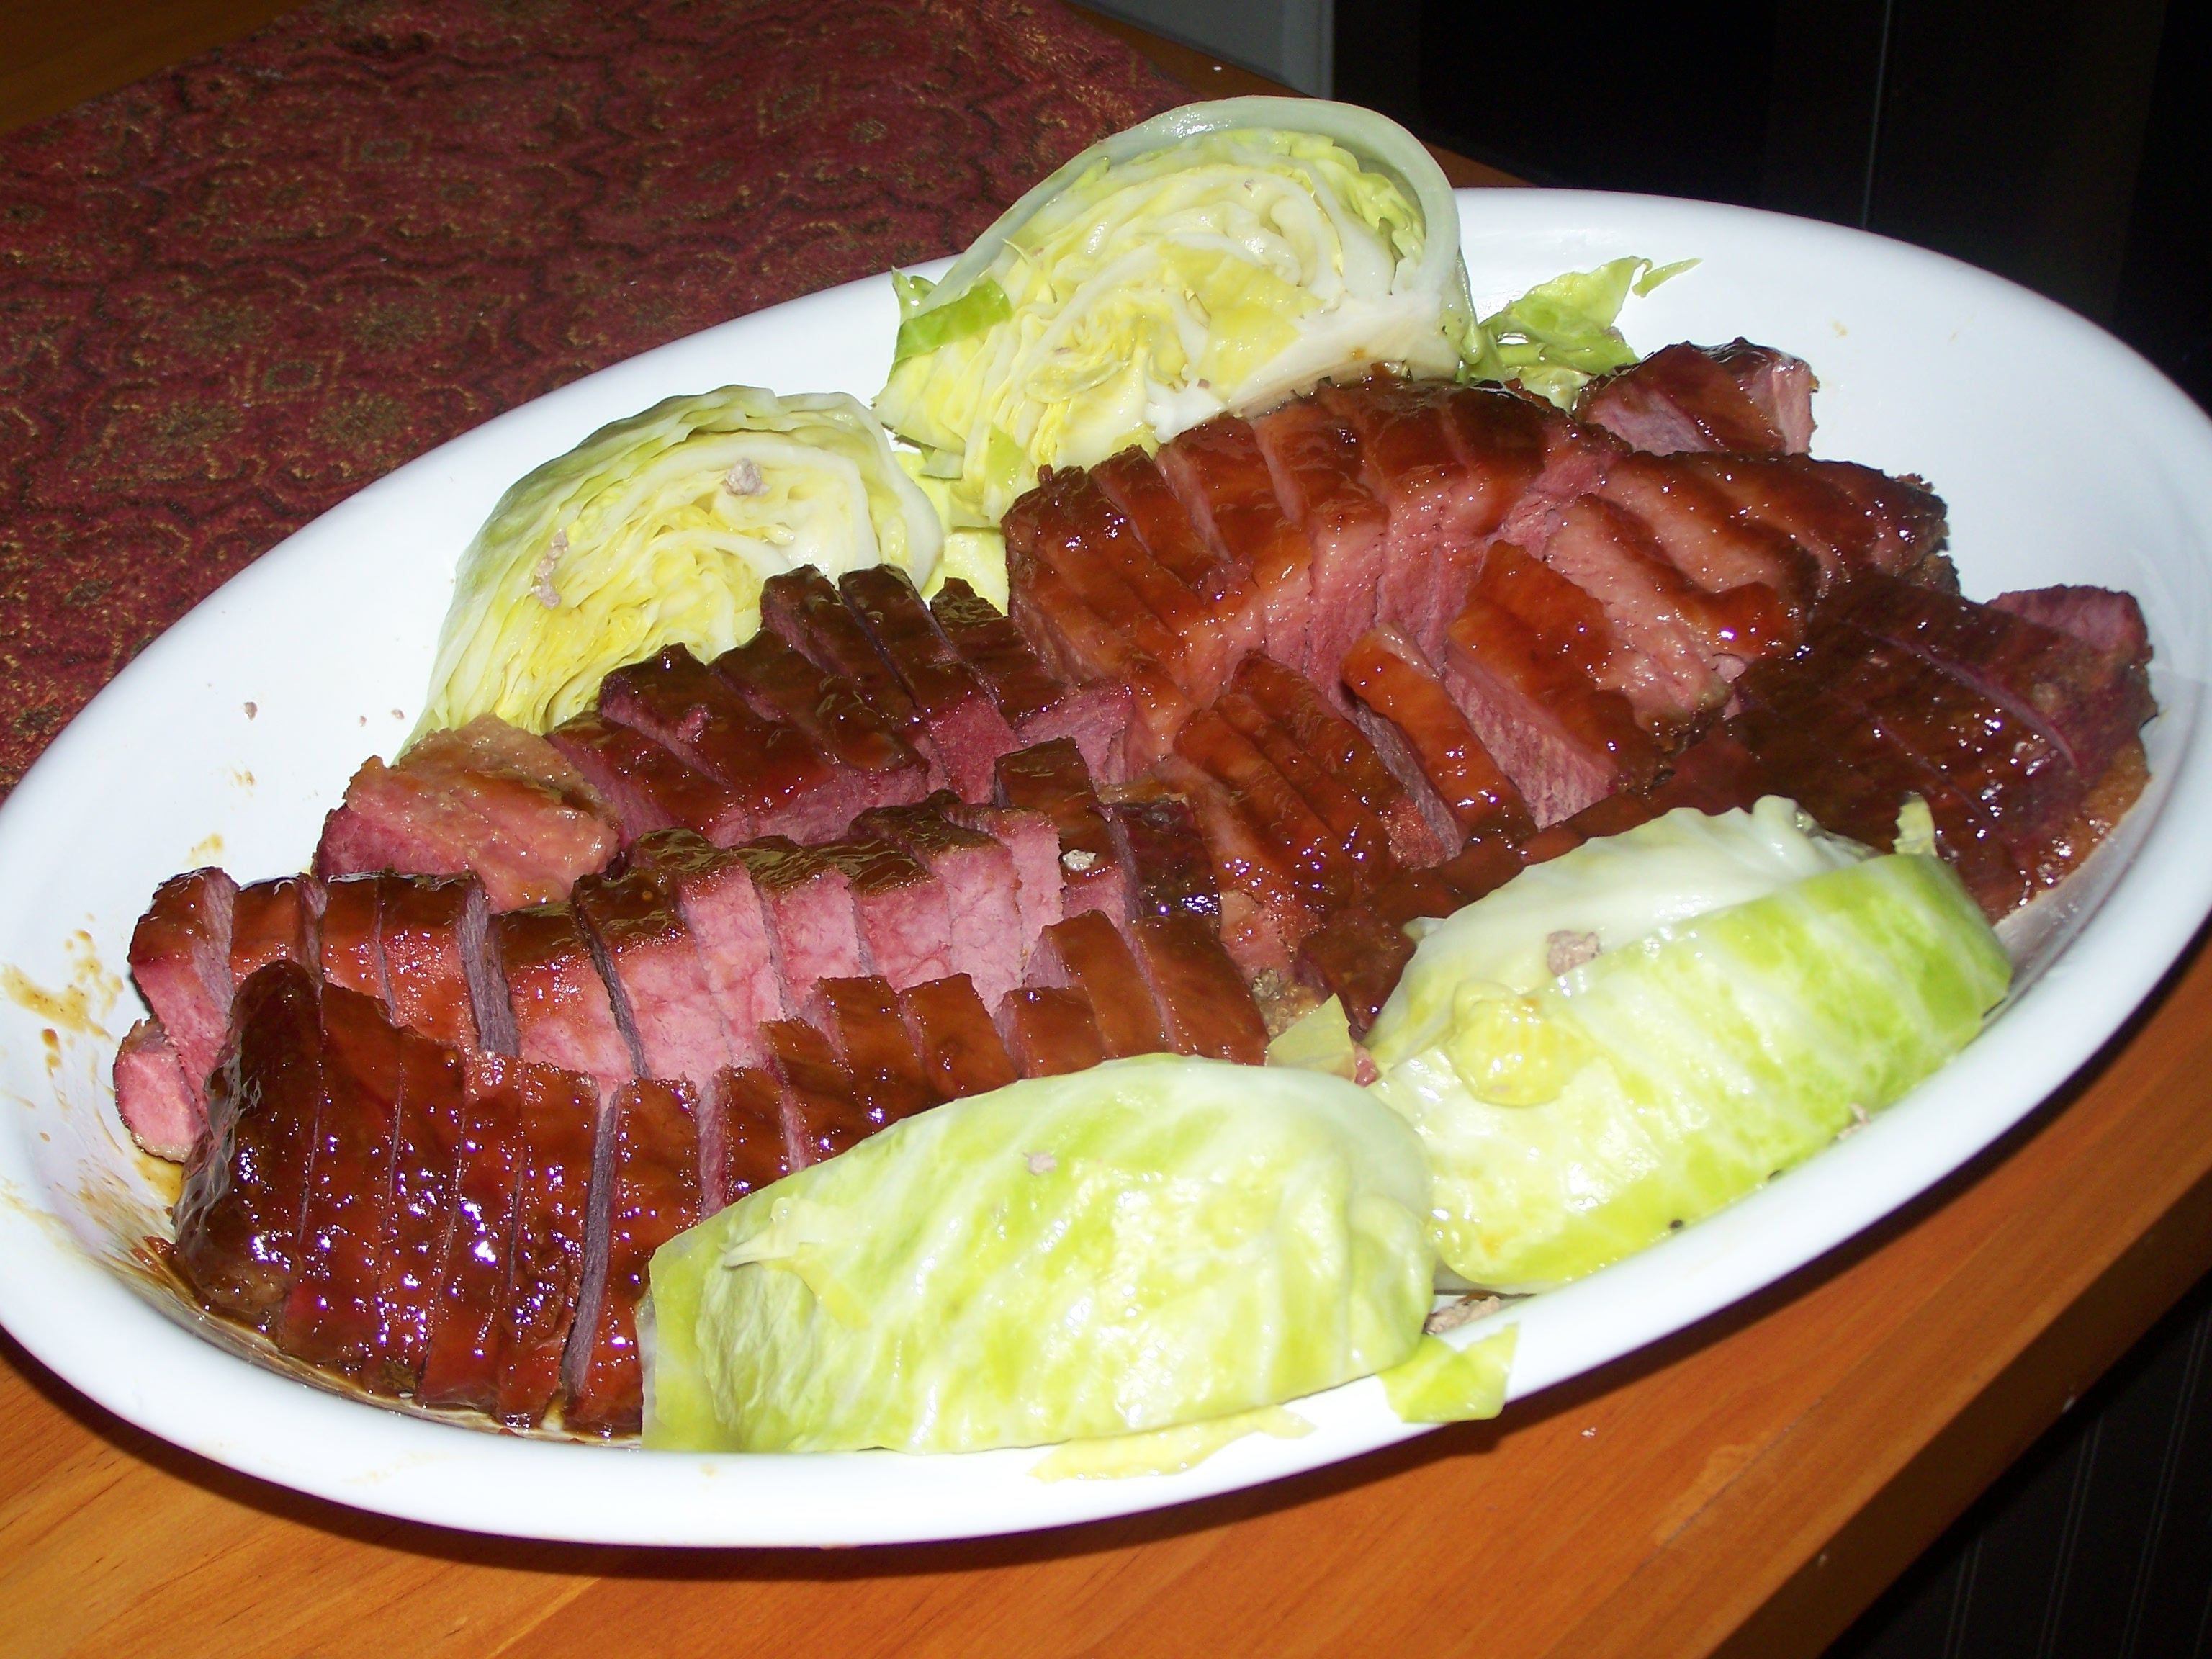 Corned Beef And Cabbage In Oven
 Authentic Corned Beef and Cabbage Recipe